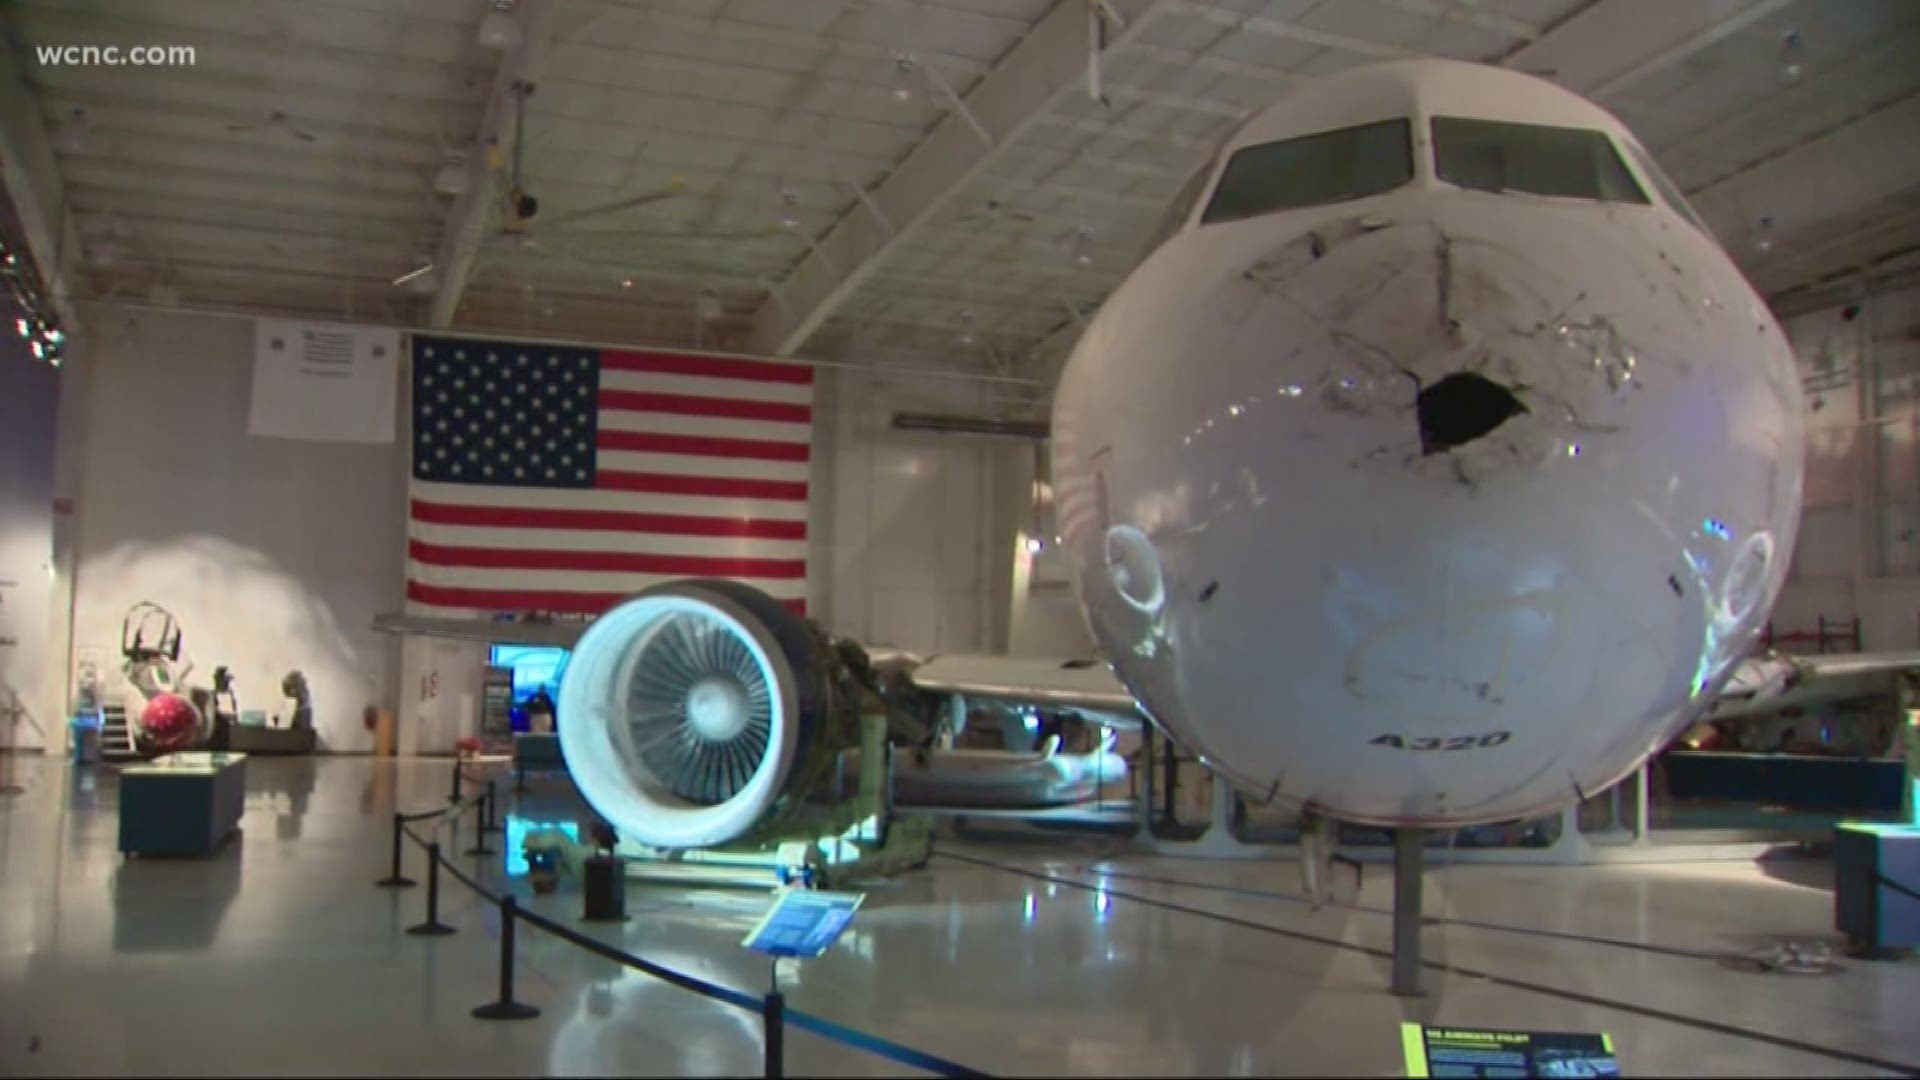 Along with Flight 1549, the museum is home to about 50 other aircraft including vintage fighter jets and passenger planes that will have to be moved and stored.